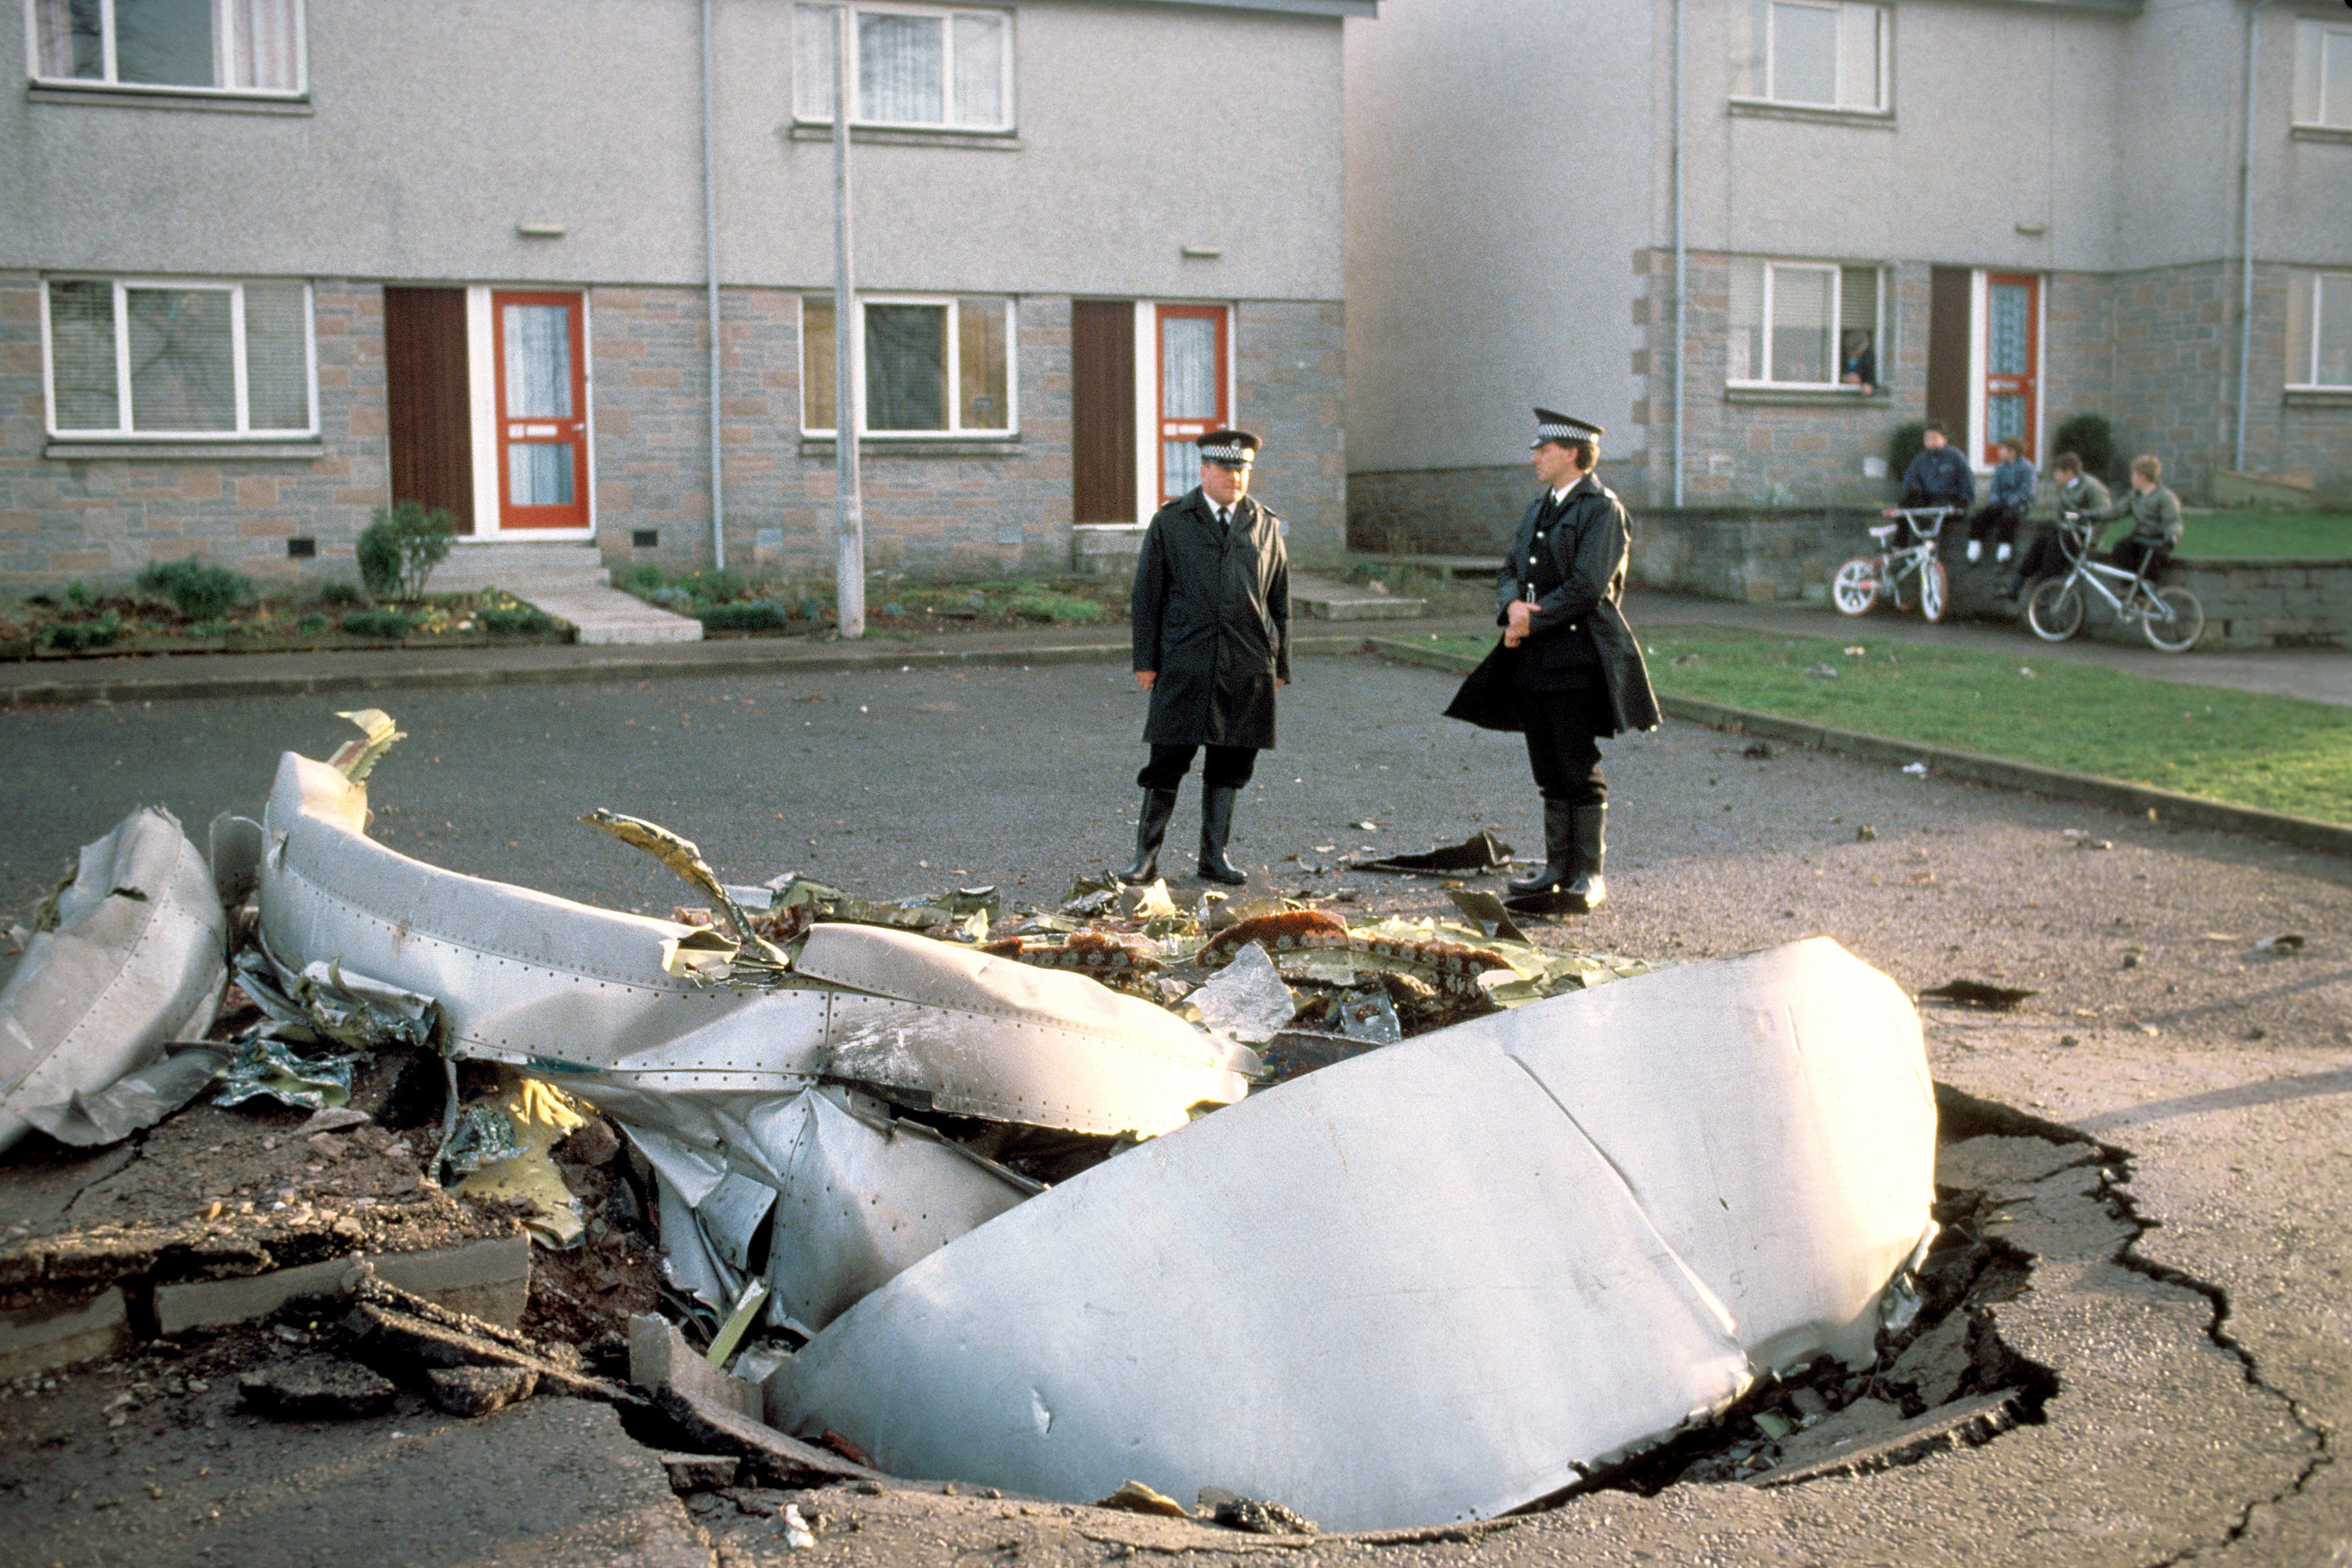 New drama will tell story of Lockerbie bombing and subsequent investigation | The Independent